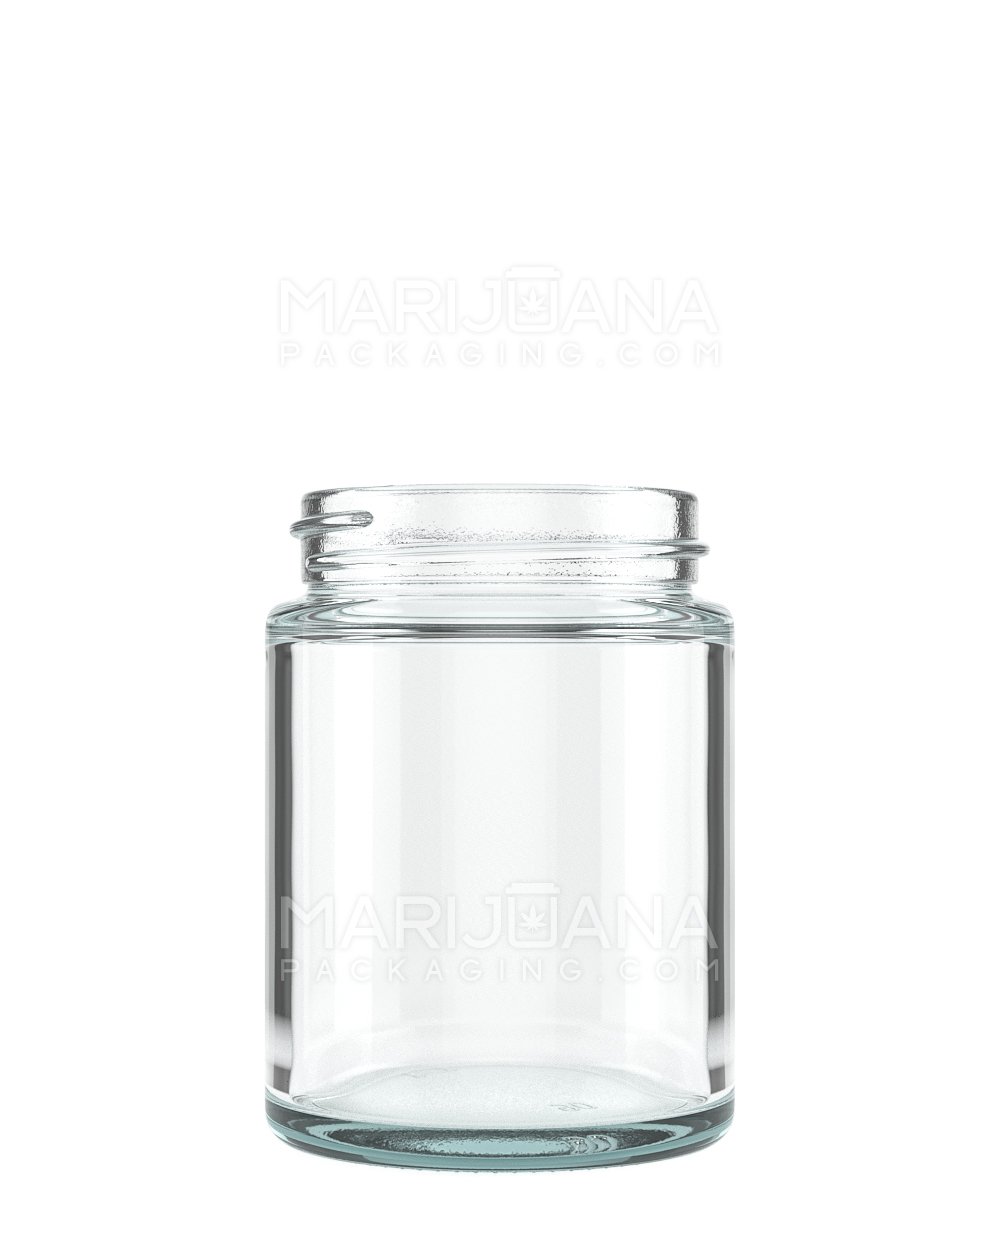 Straight Sided Clear Glass Jars with Black Cap | 53mm - 4oz - 120 Count - 2